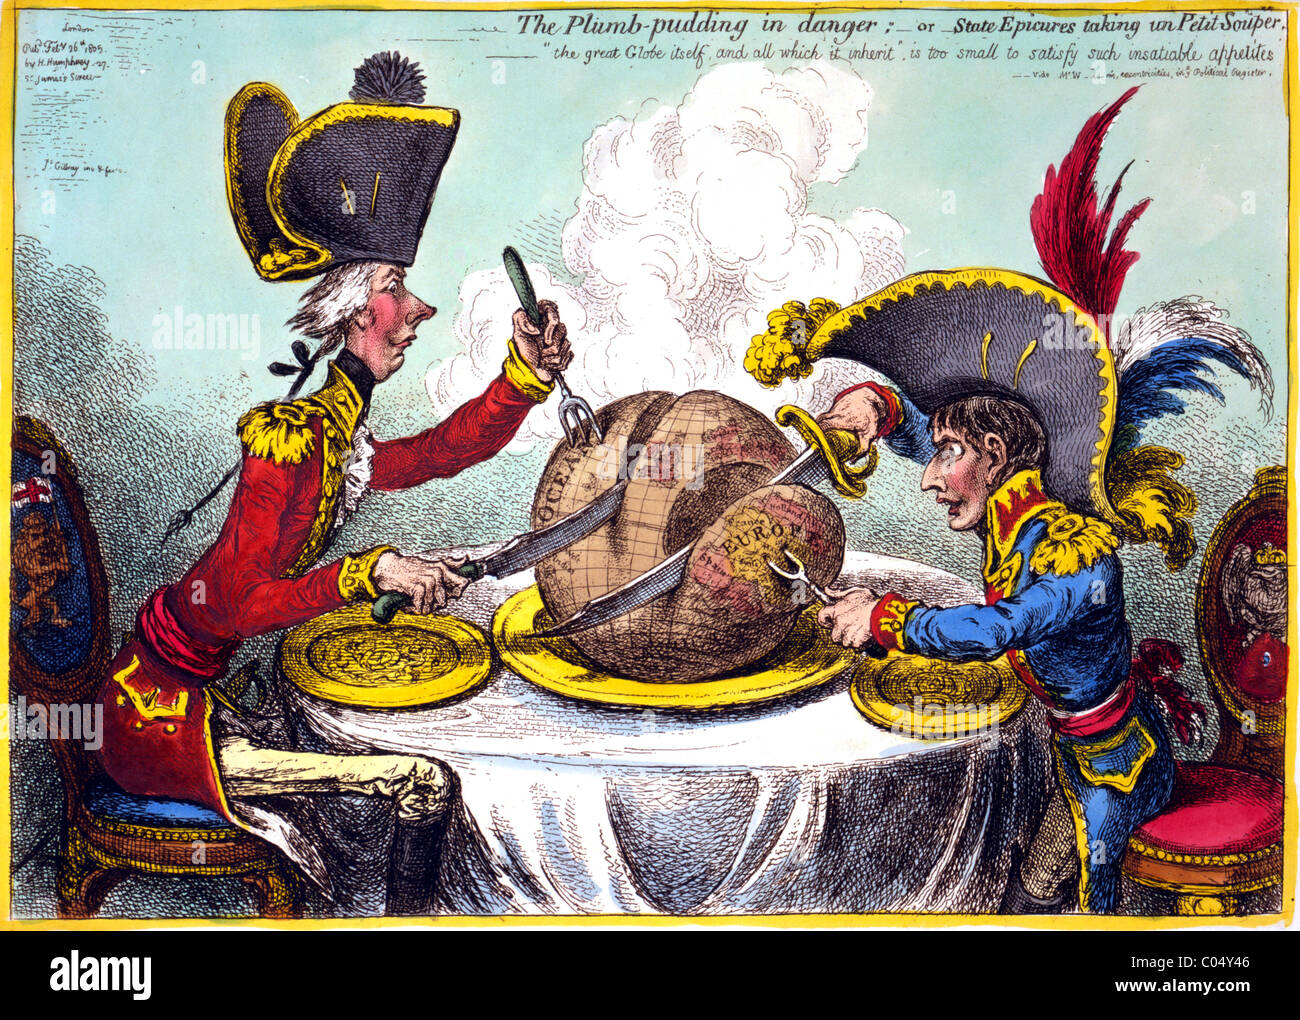 William Pitt and Napoleon depicted in a satirical cartoon. The Plumb-pudding in Danger (1805). By James Gillray. The world being carved up into spheres of influence between Pitt and Napoleon. Stock Photo